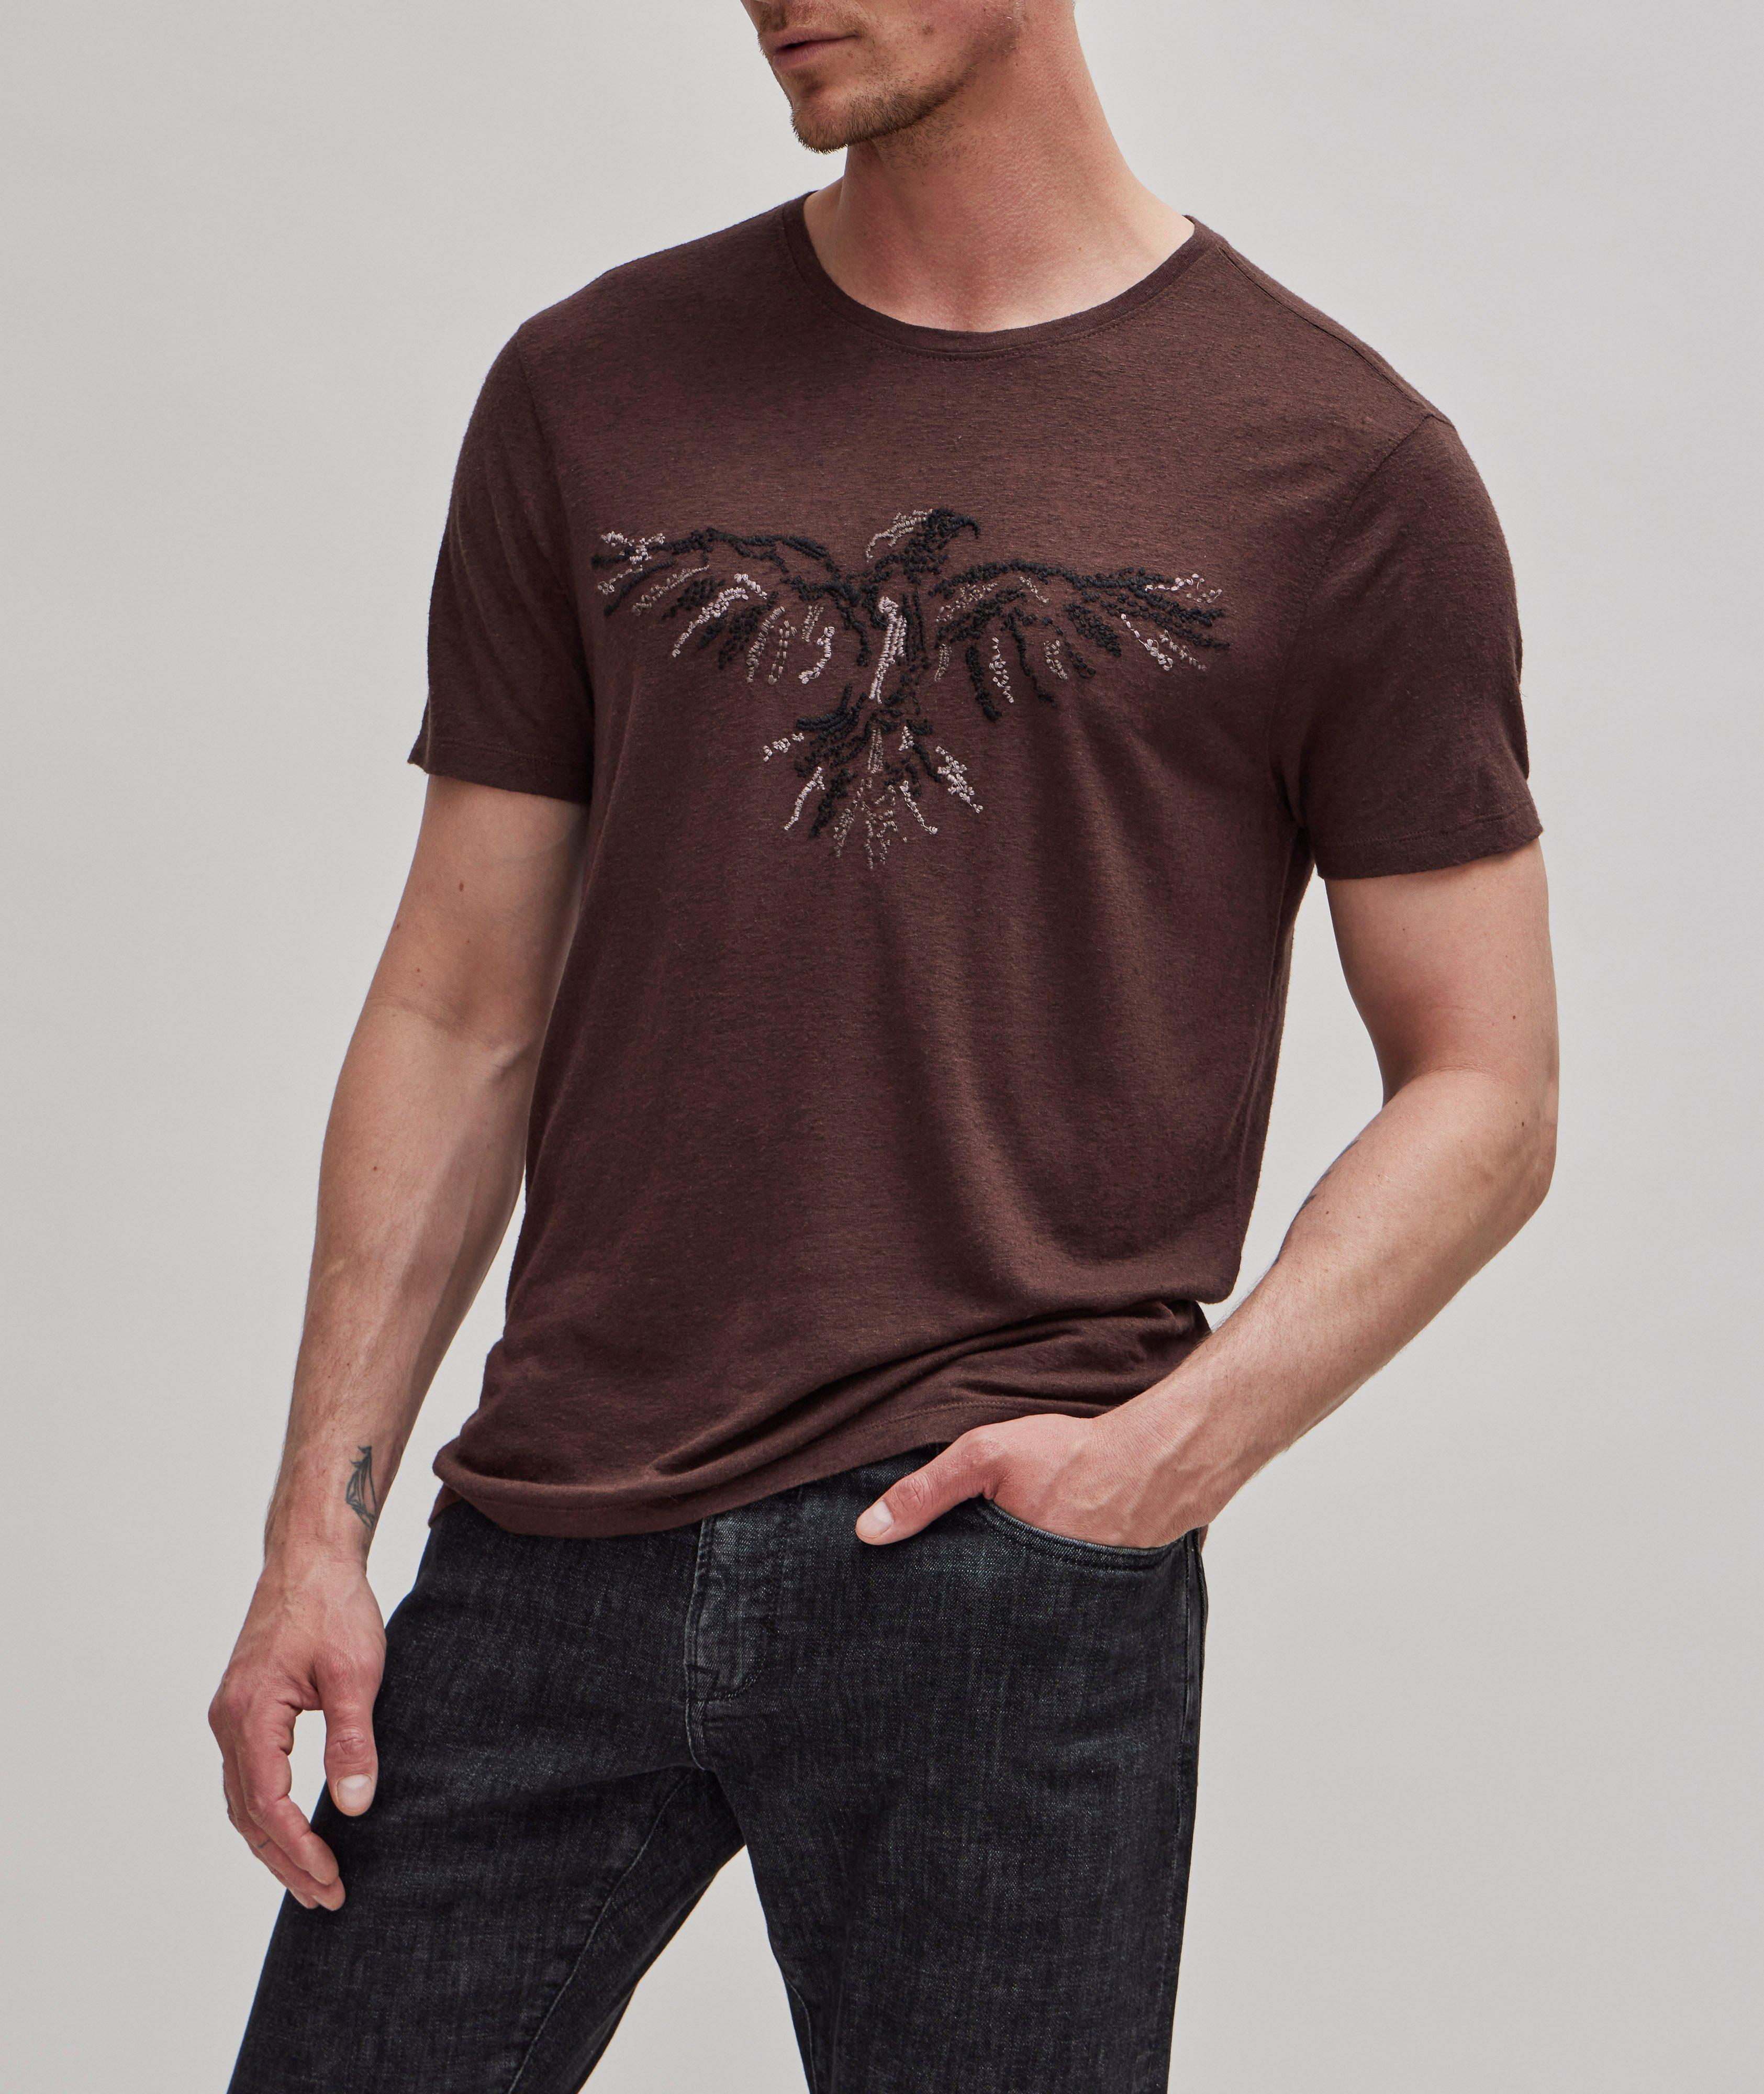 Raven Embroidered Crew Neck T-Shirt image 1